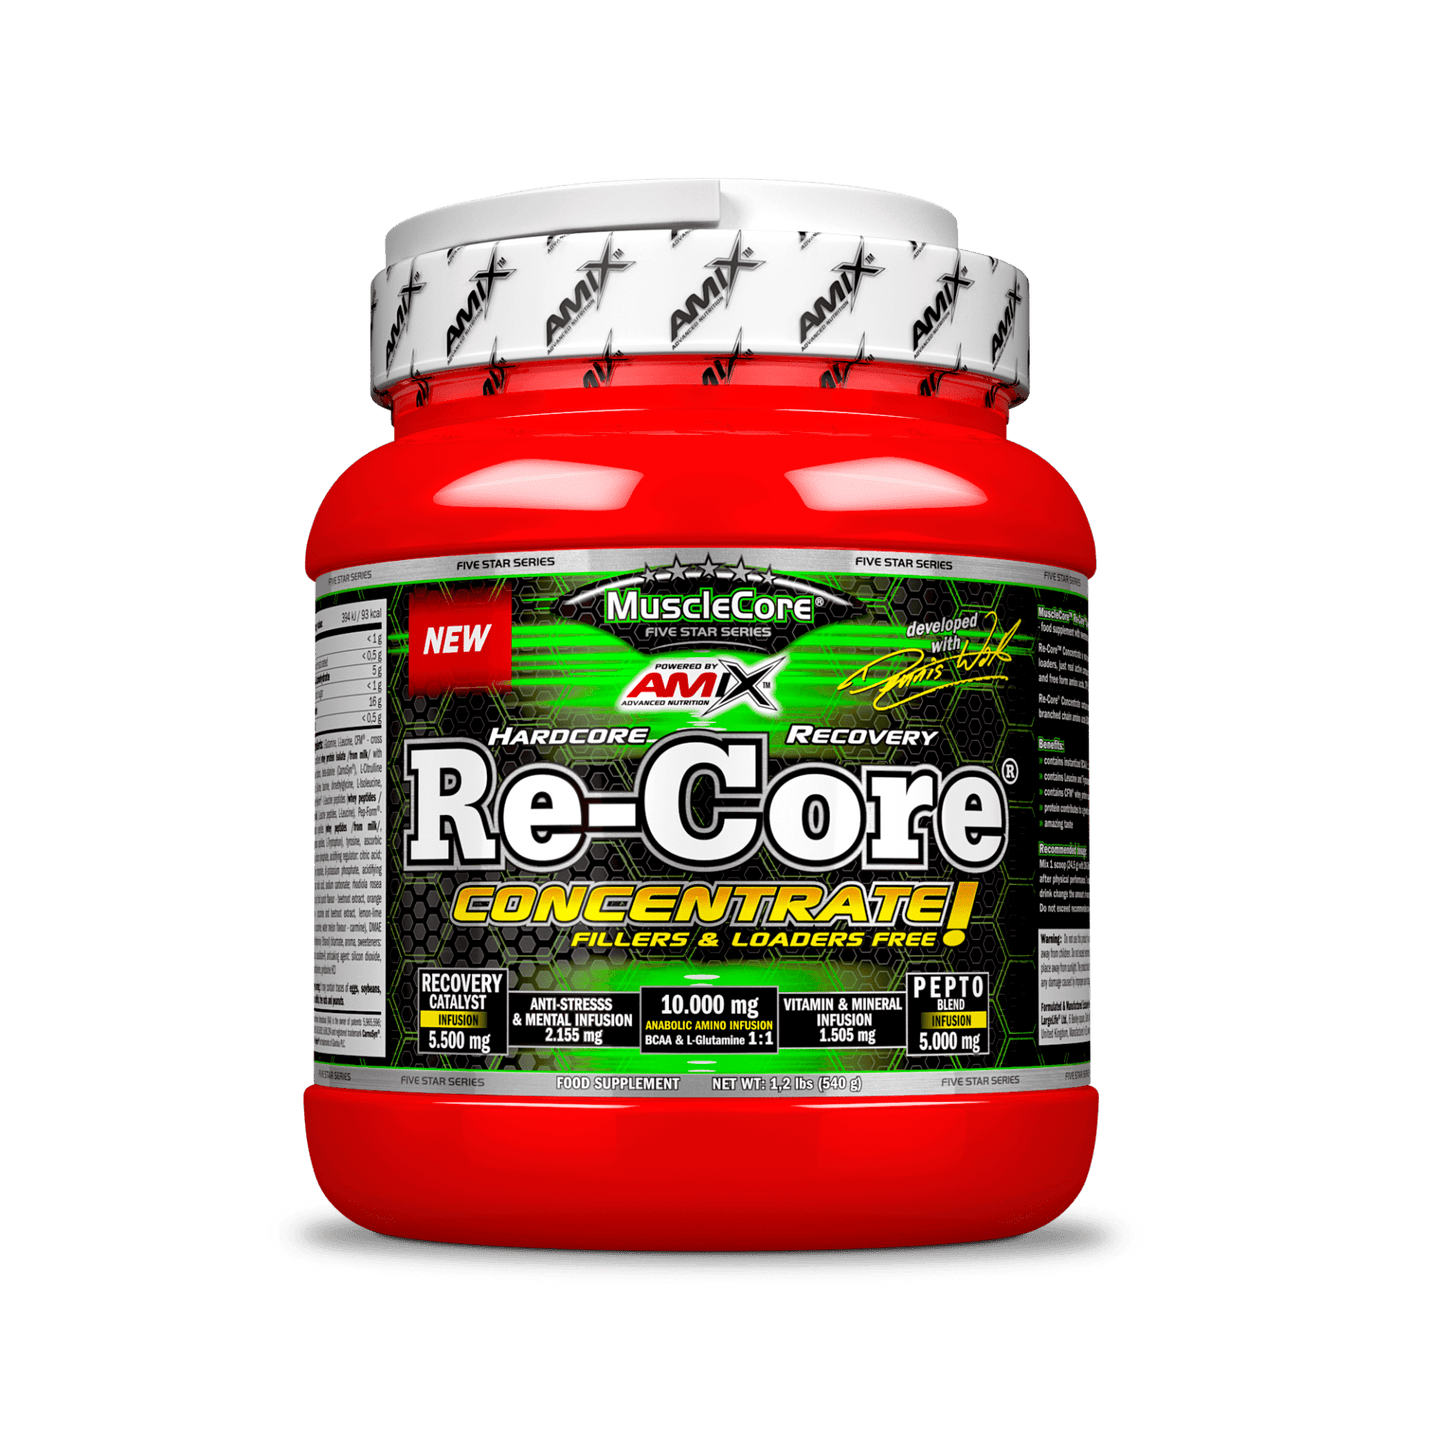 Re-Core Concetrate 540g